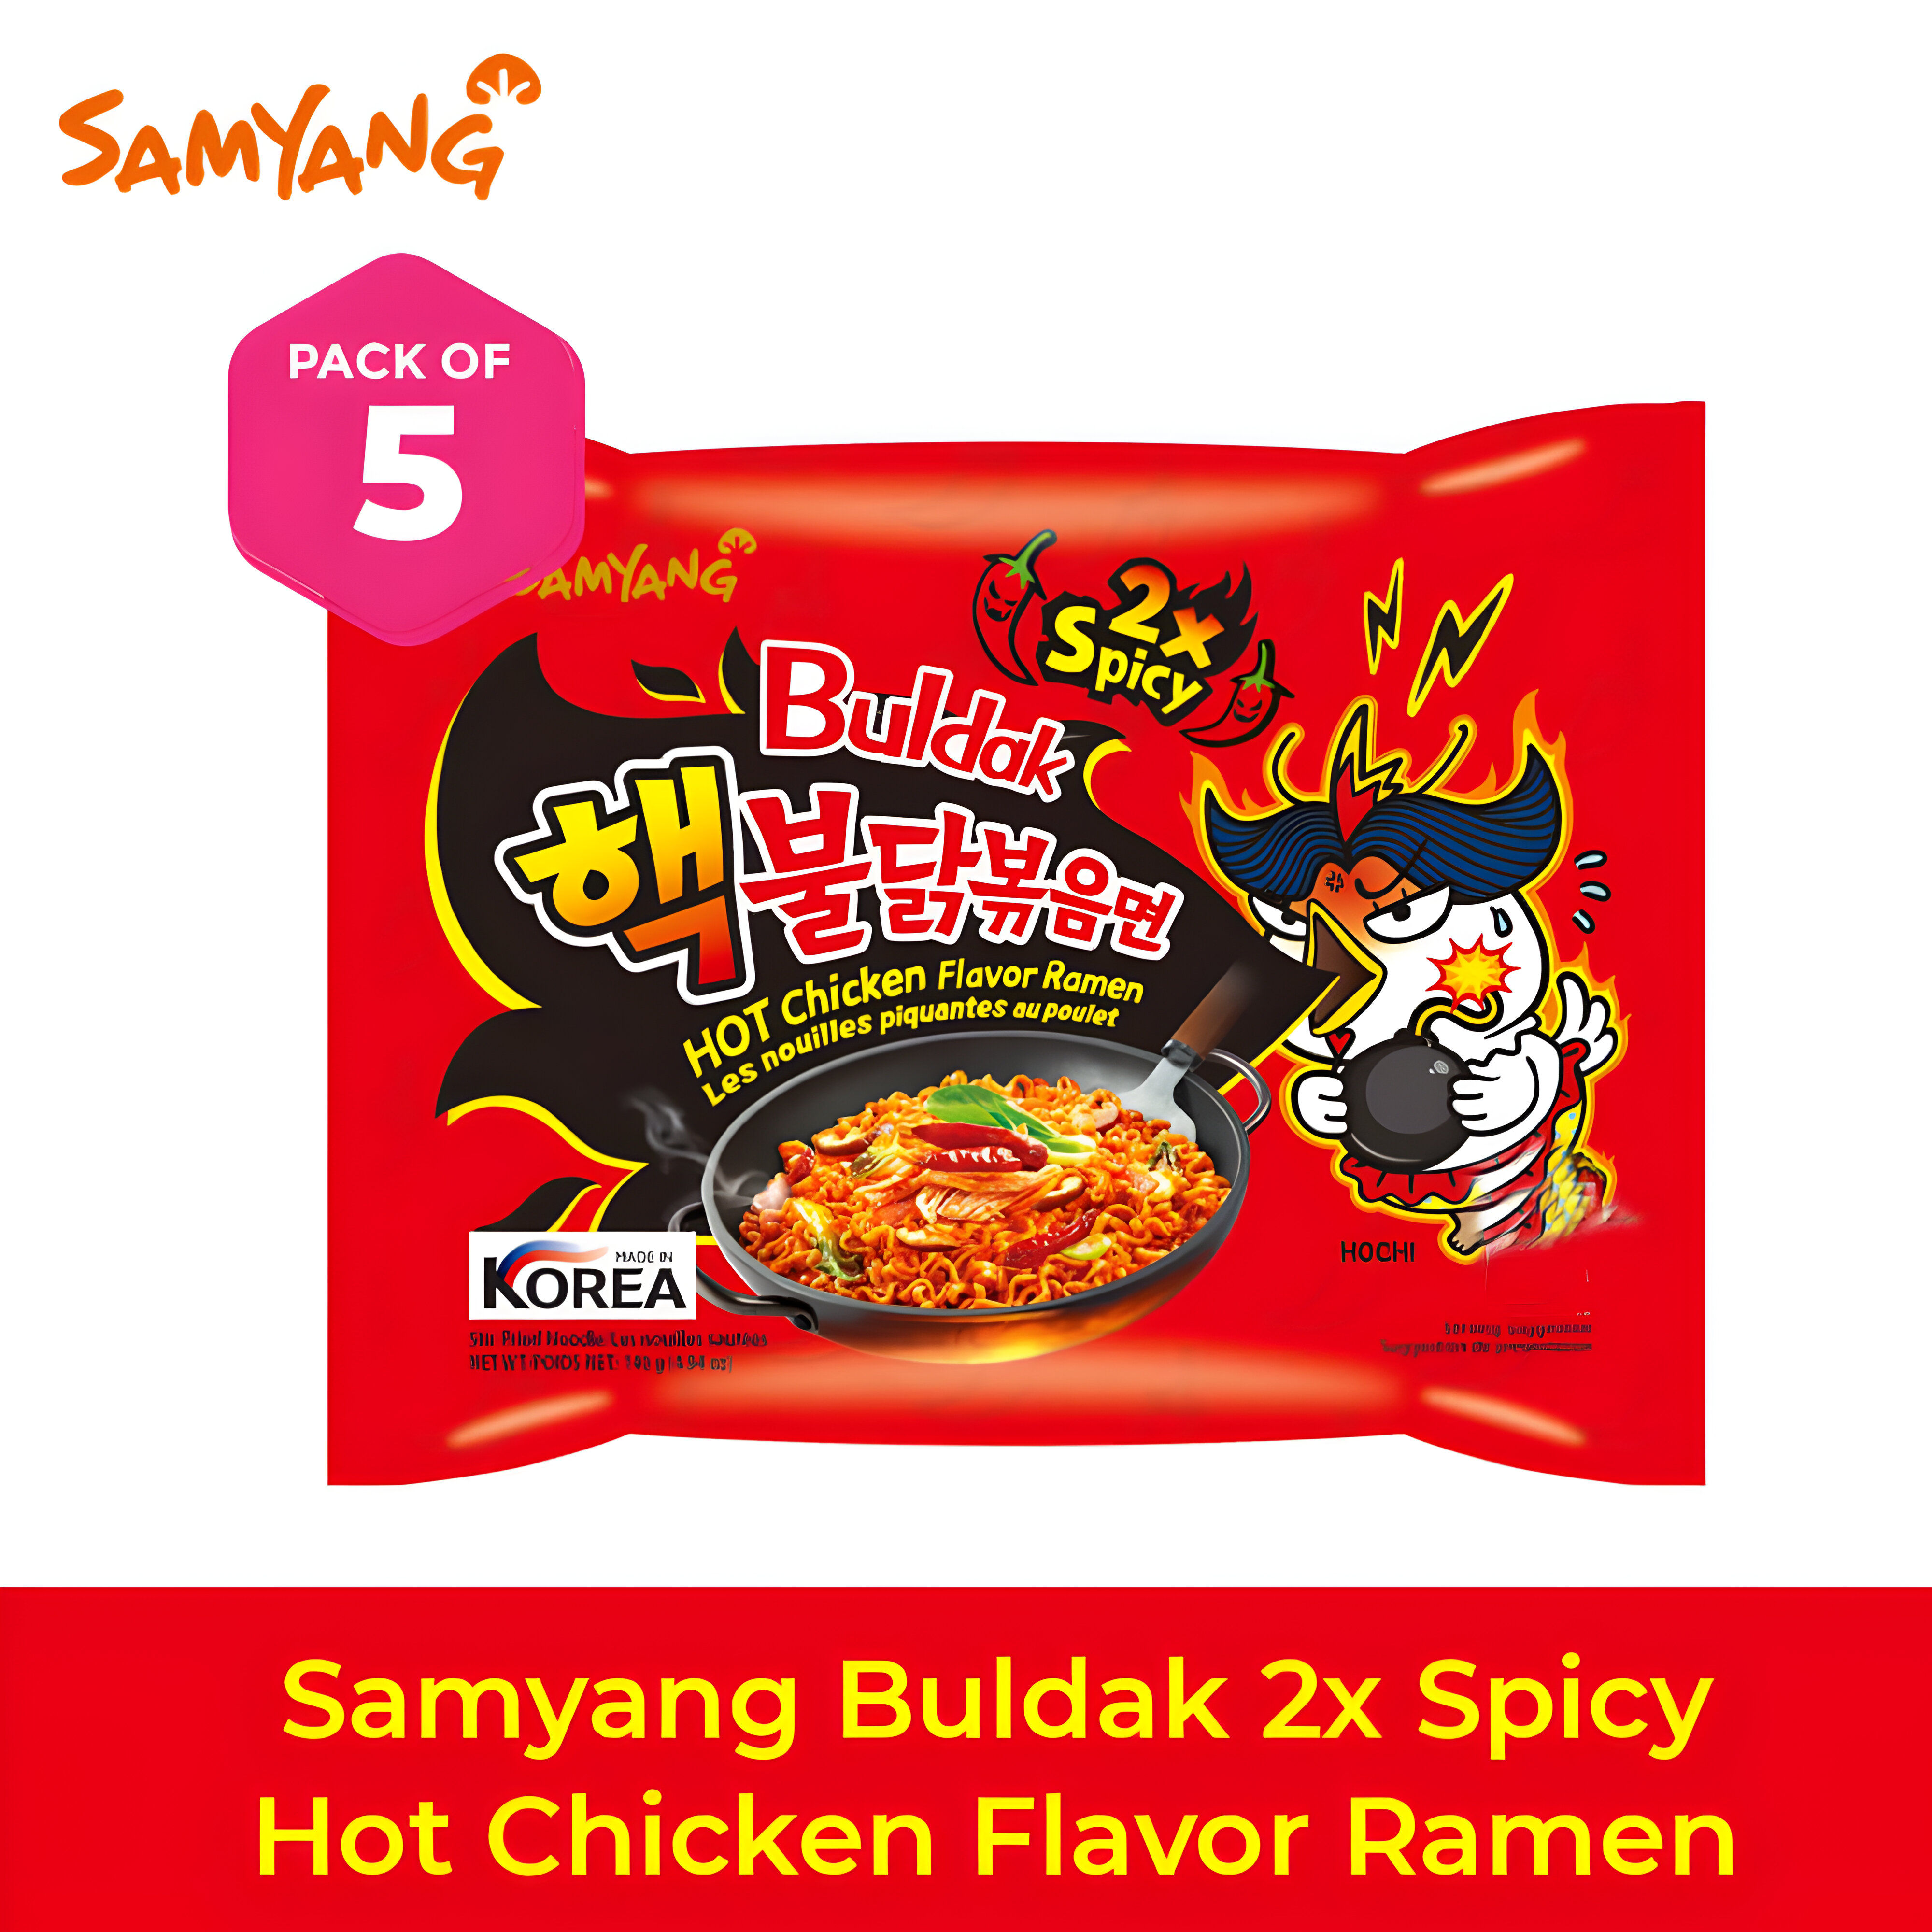 1694405541_1663405059_Fire-Chicken-2X-Spicy-NoodlePack-of-5-1 (1)